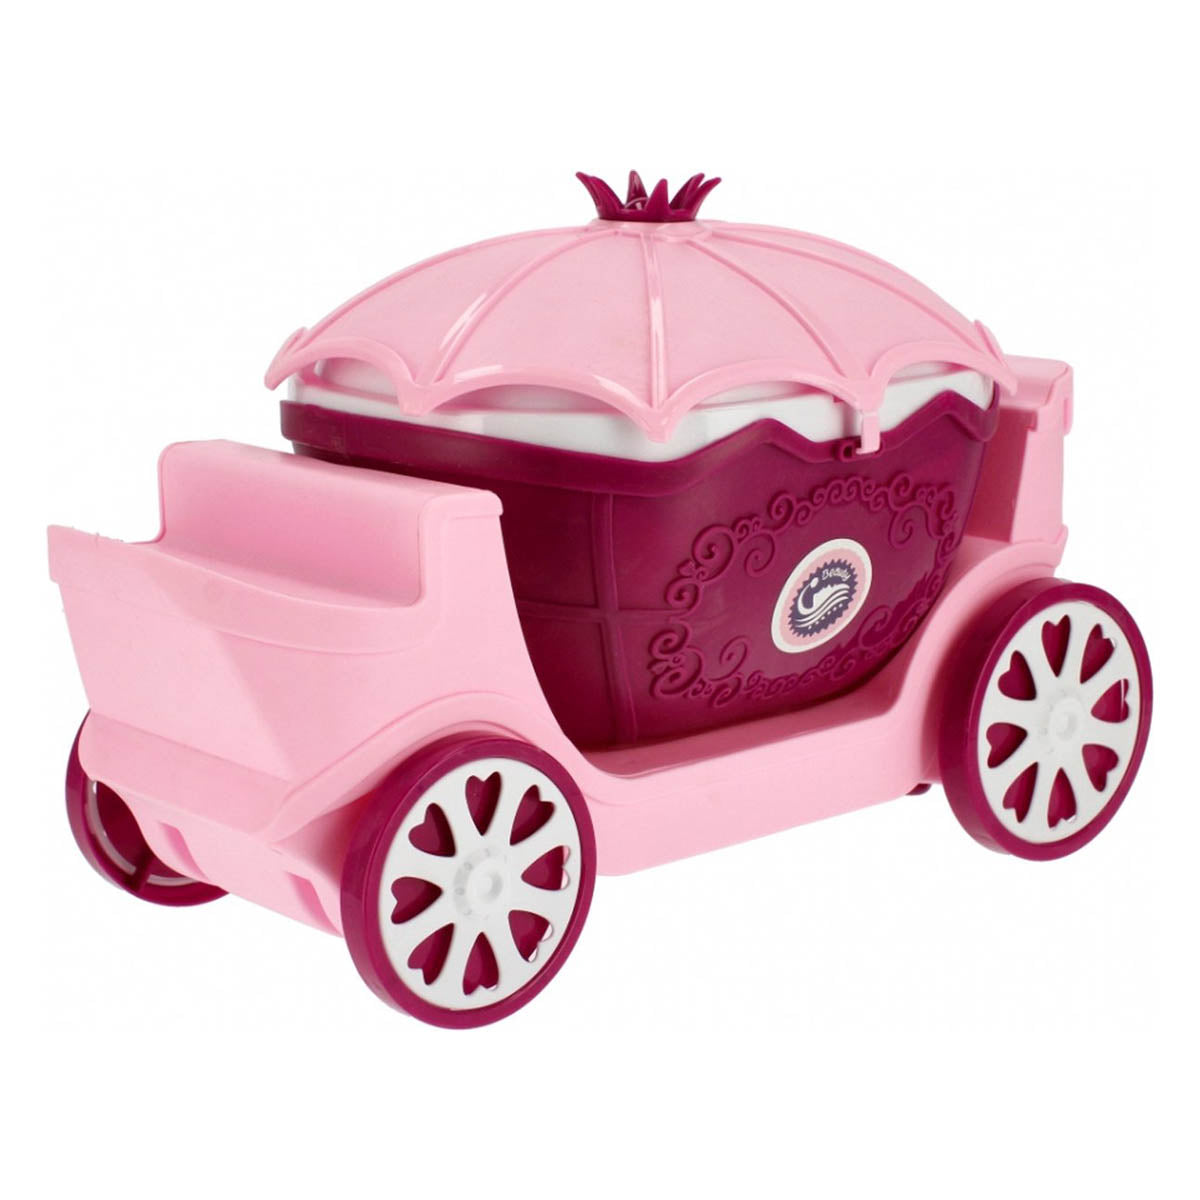 <tc>Ariko</tc> Toy trolley Beauty salon 31 pieces - Hair dryer, mirror, make-up, perfume and much more - handy take-away suitcase with wheels